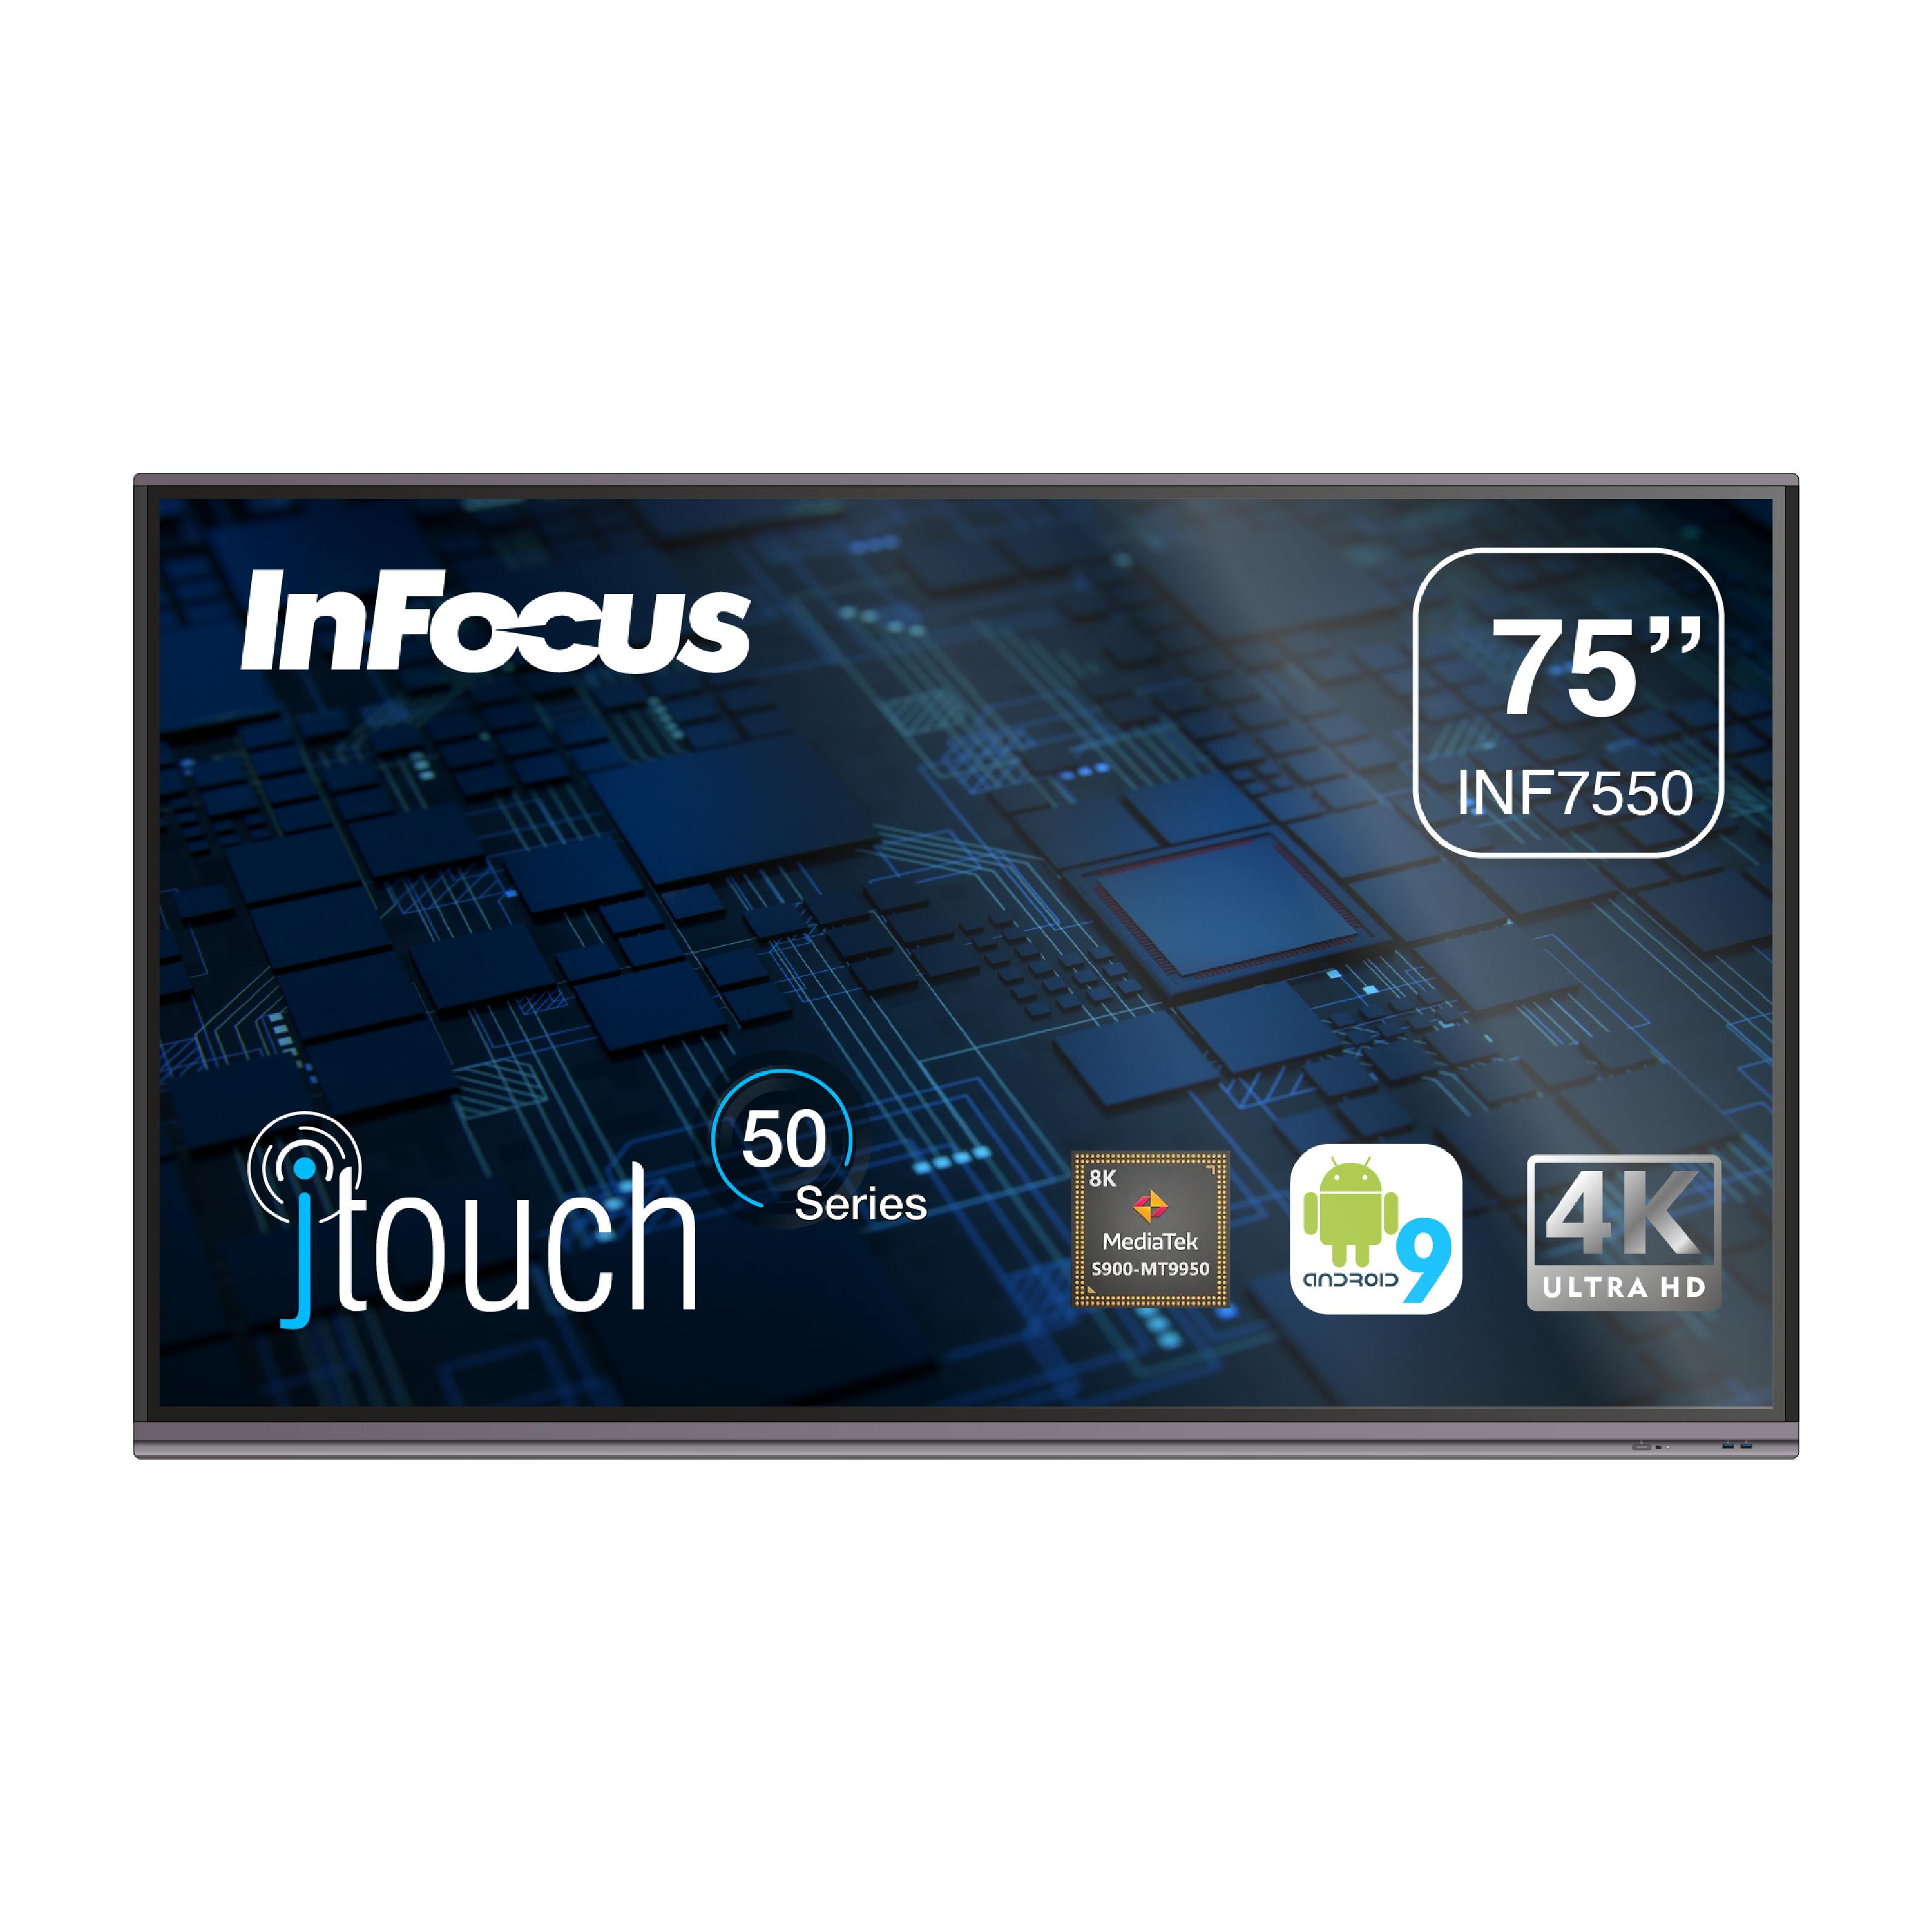 https://infocus.imgix.net/2022/04/JTouch-50-Series_INF7550_F_90-01.png?auto=compress%2Cformat&ixlib=php-3.3.0